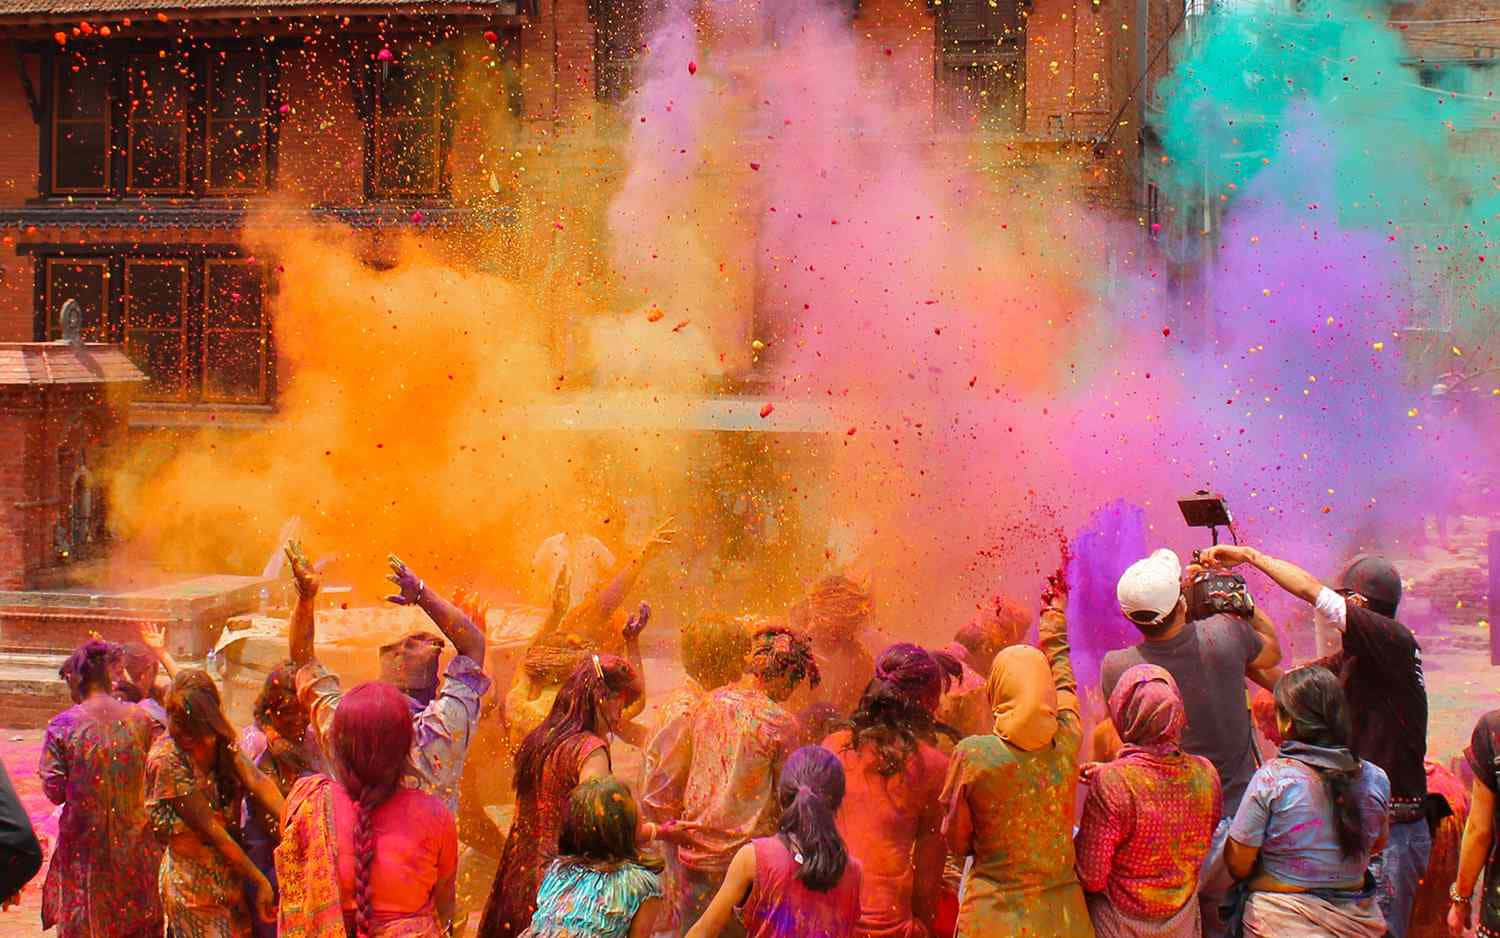 “Celebrate the Festival of Colors Together”